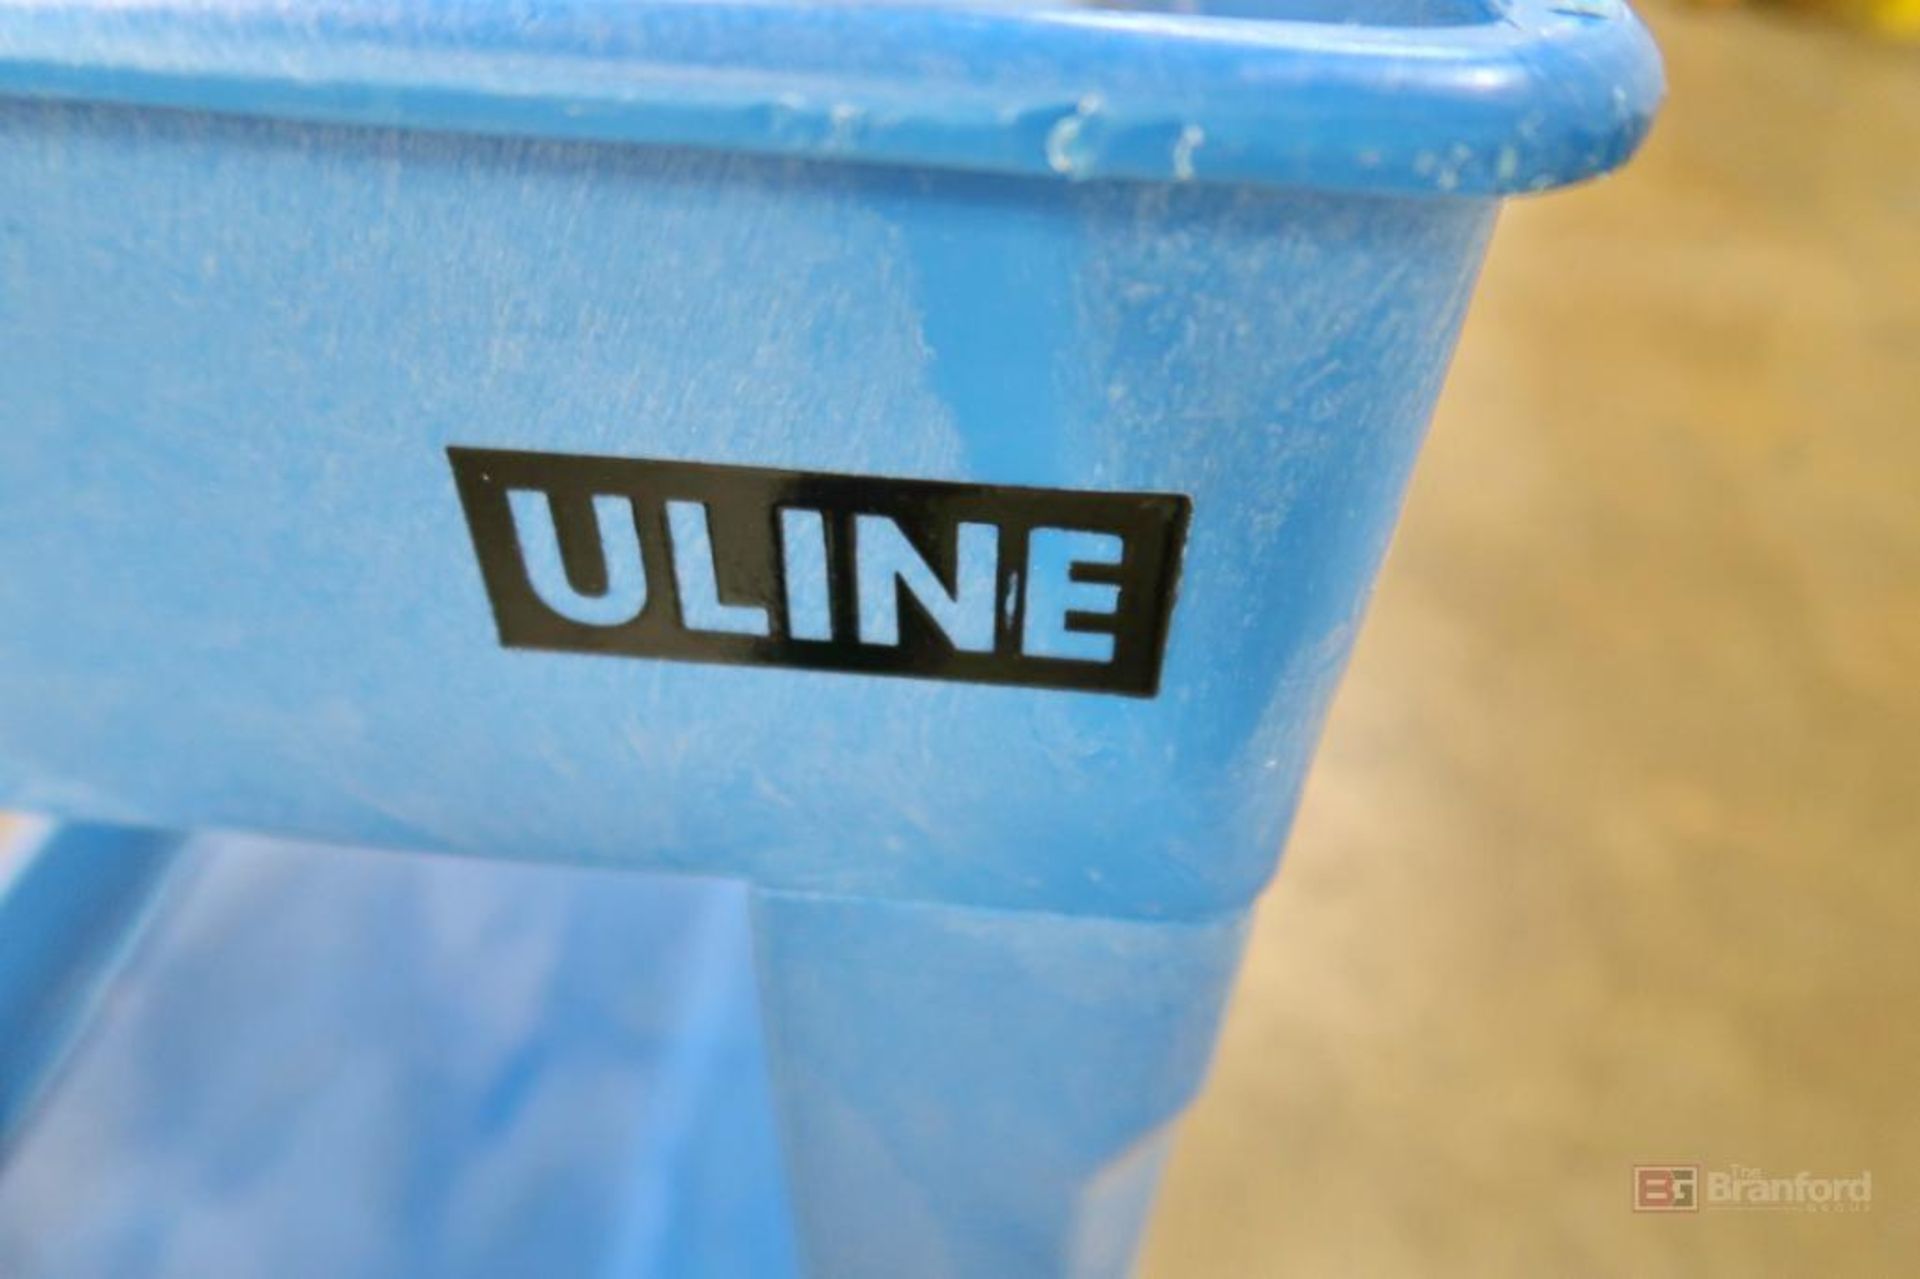 Uline Rubber Utility Cart - Image 2 of 2